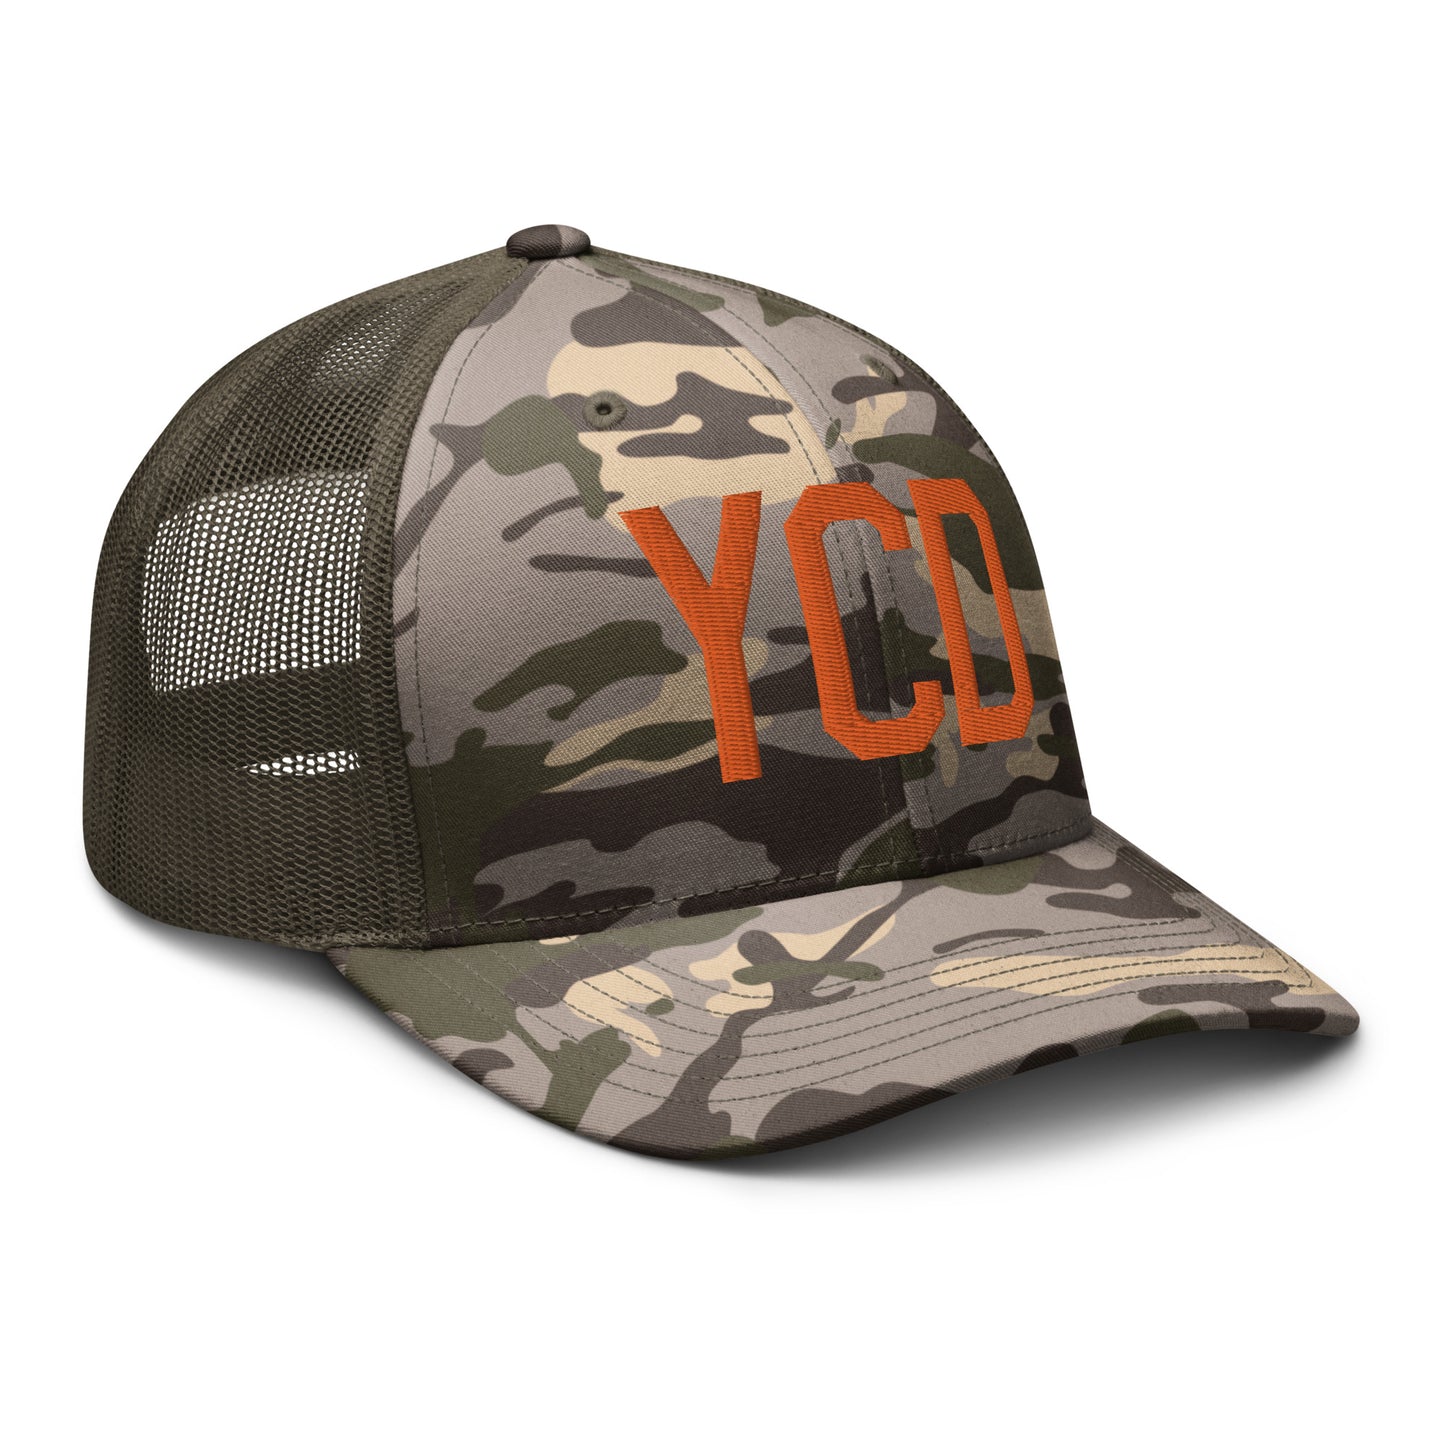 Airport Code Camouflage Trucker Hat - Orange • YCD Nanaimo • YHM Designs - Image 20